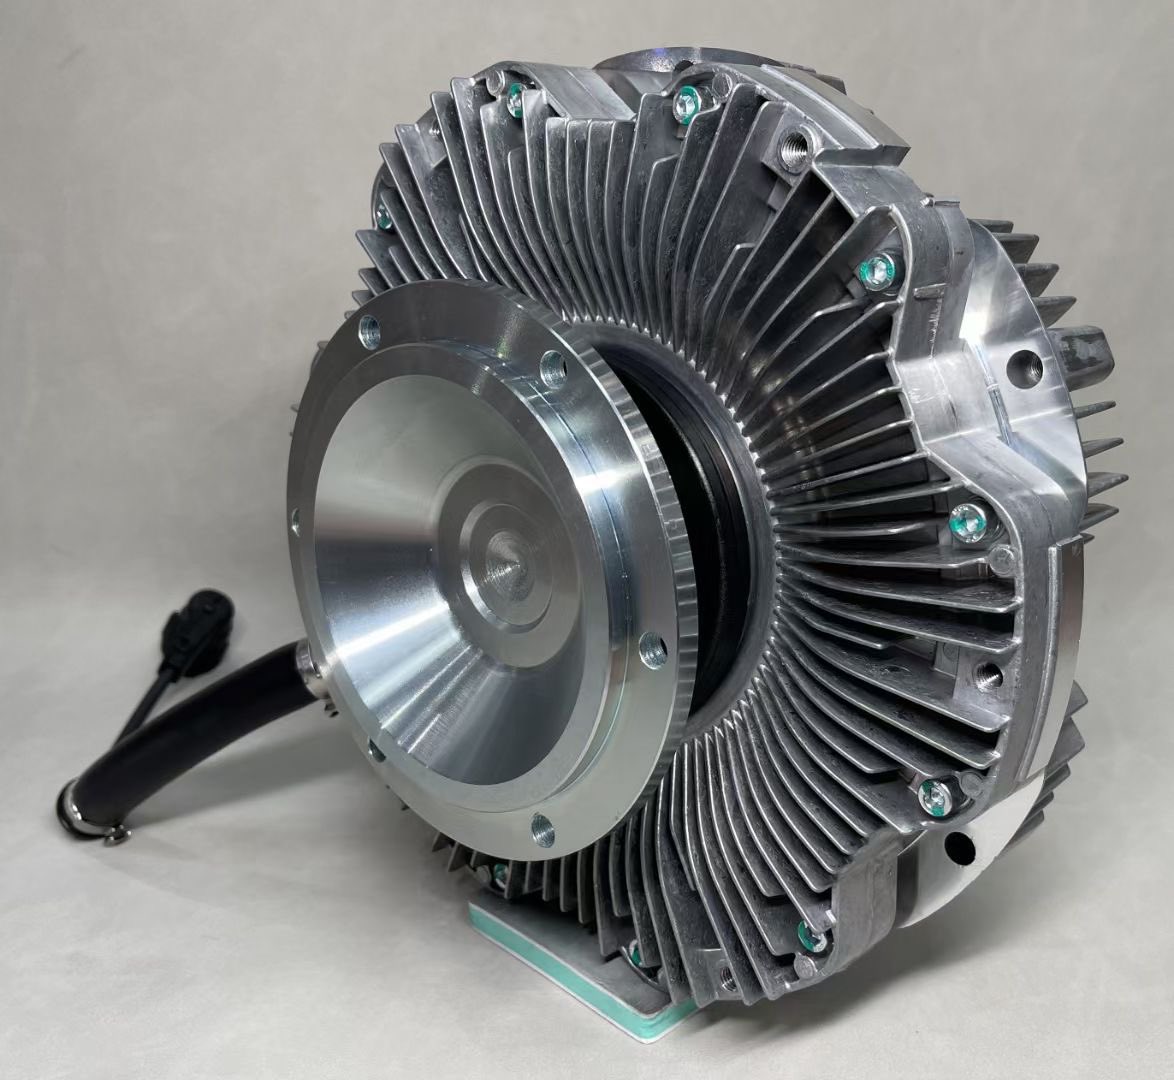 Fan clutch factory, high quality products, bulk purchase enjoy preferential prices, welcome to inquire
WhatsApp:+8618868719038
#Truckparts #Fanclutch